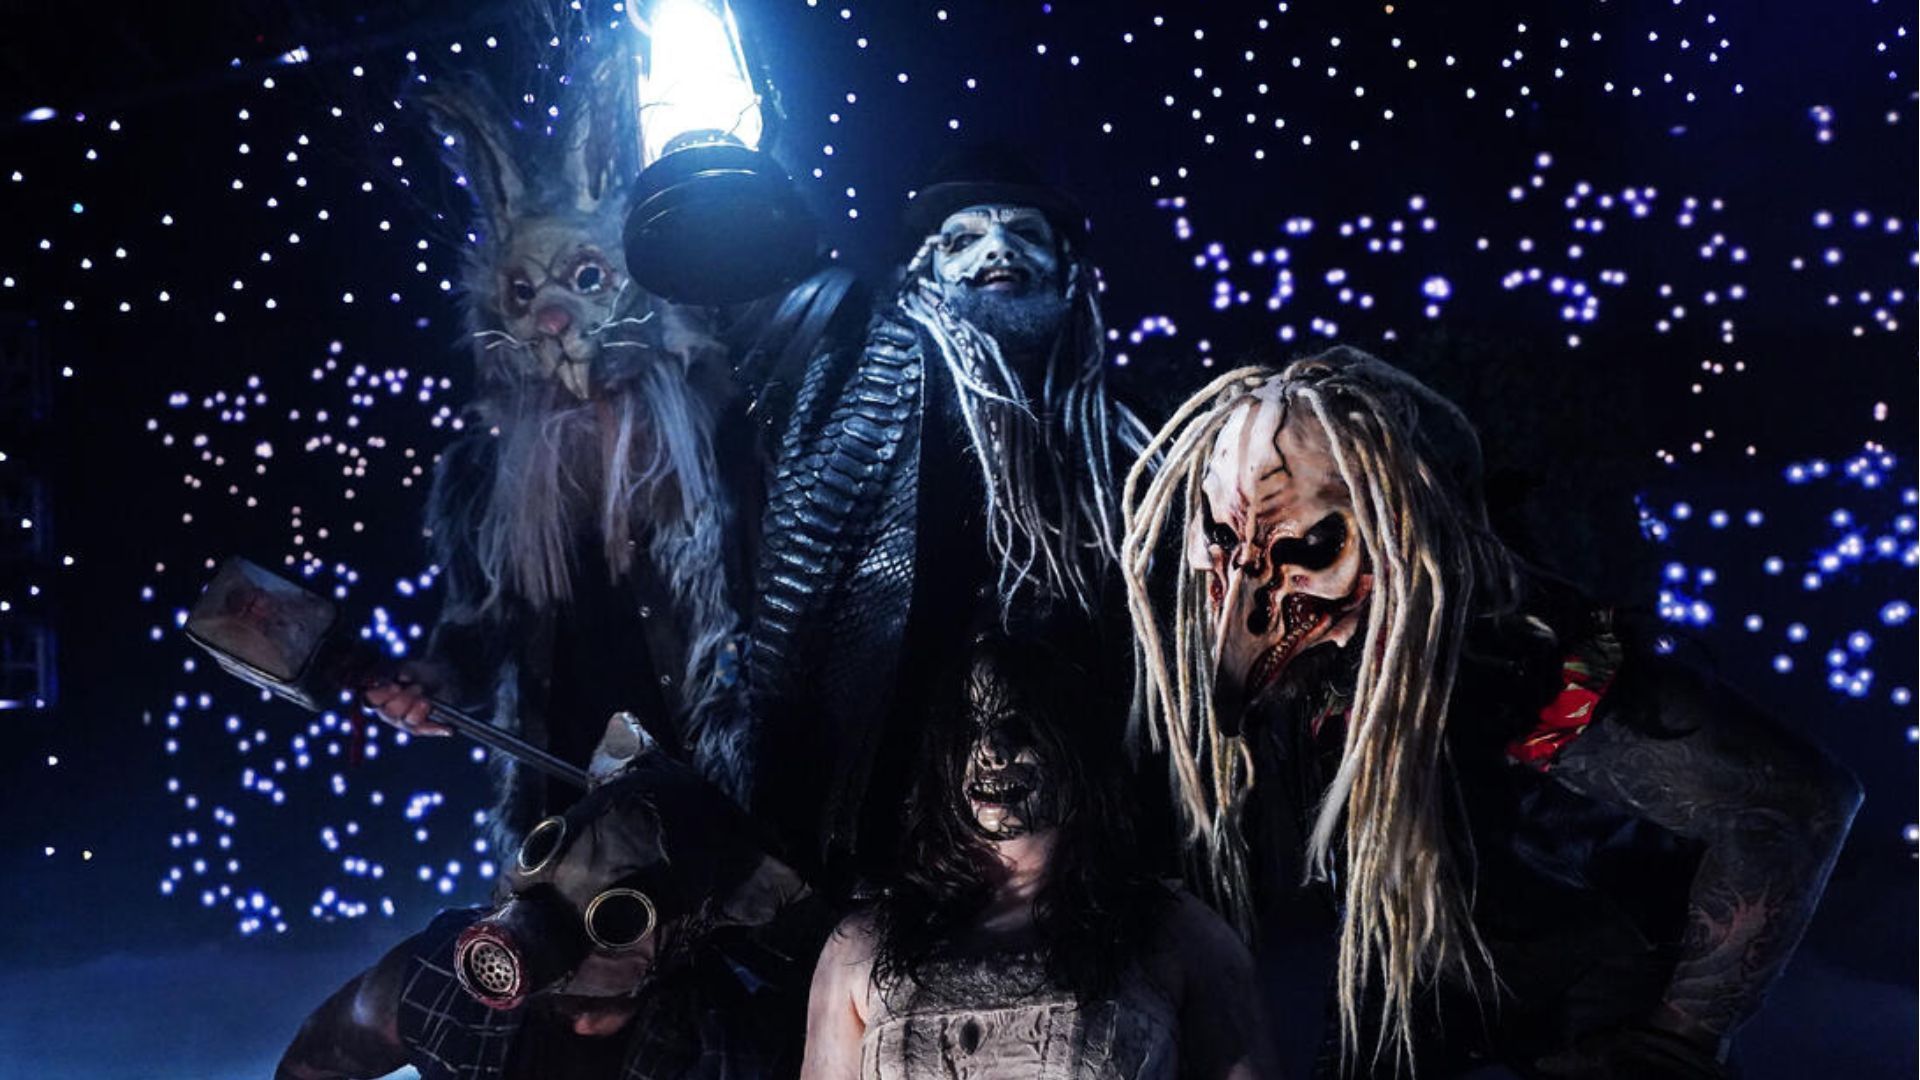 The Wyatt Sicks faction debuted this past Monday night on RAW. [Photo: WWE.com]